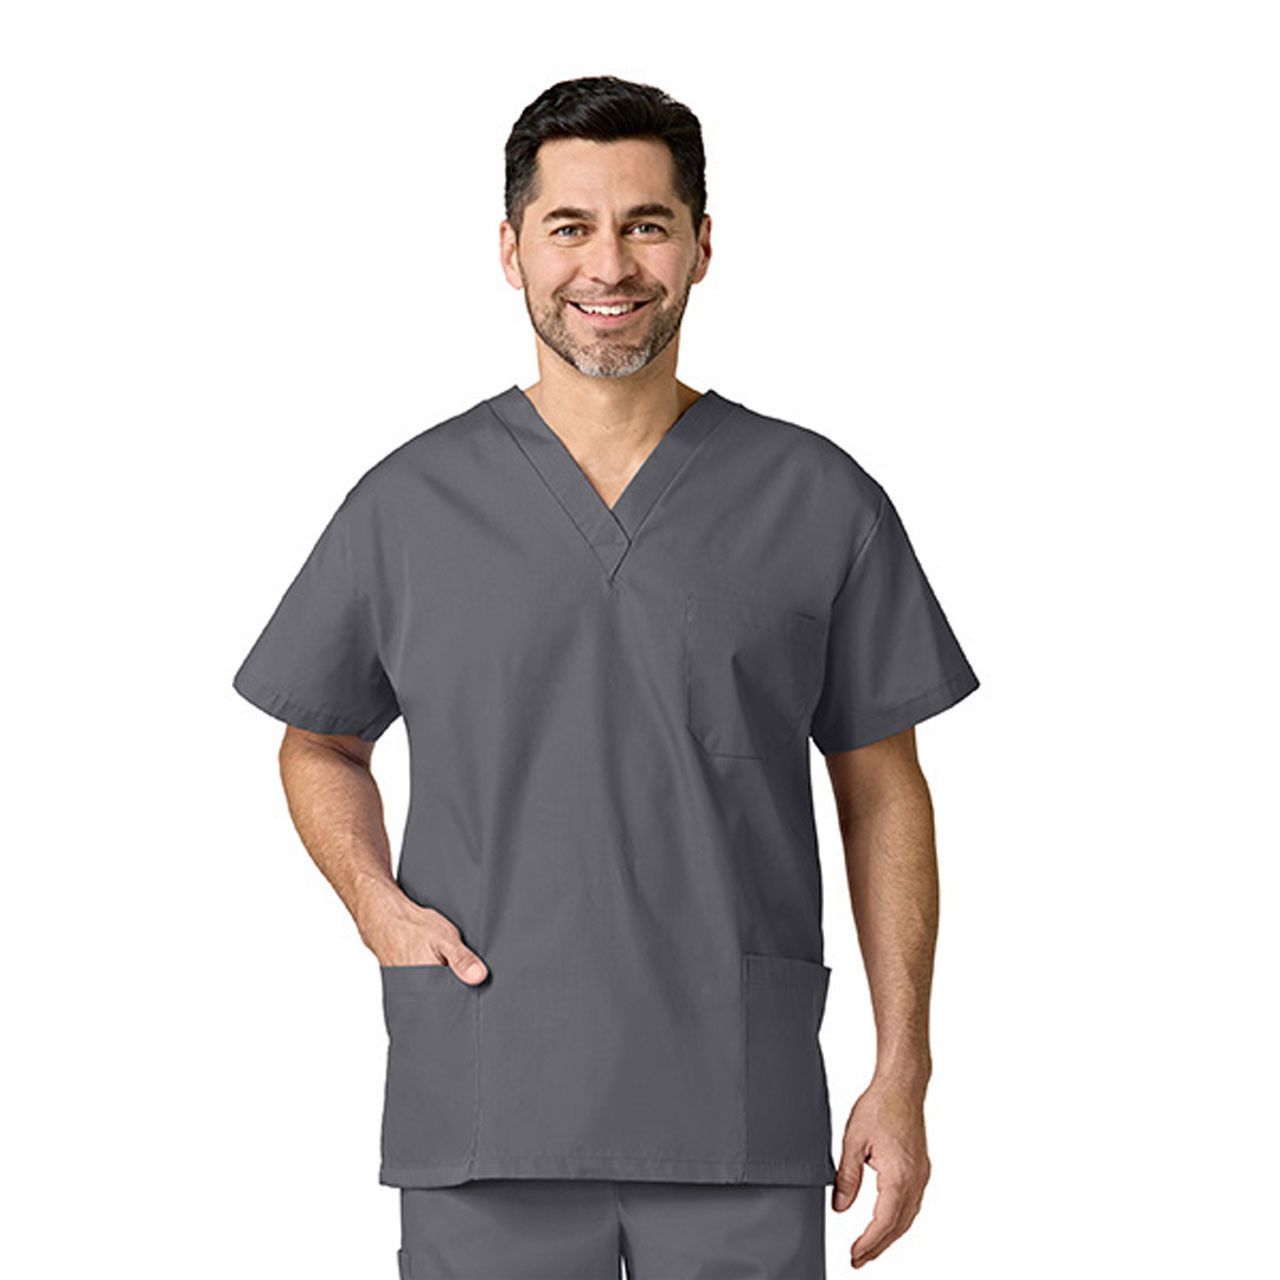 How durable is the Fashion Seal Scrub Top?